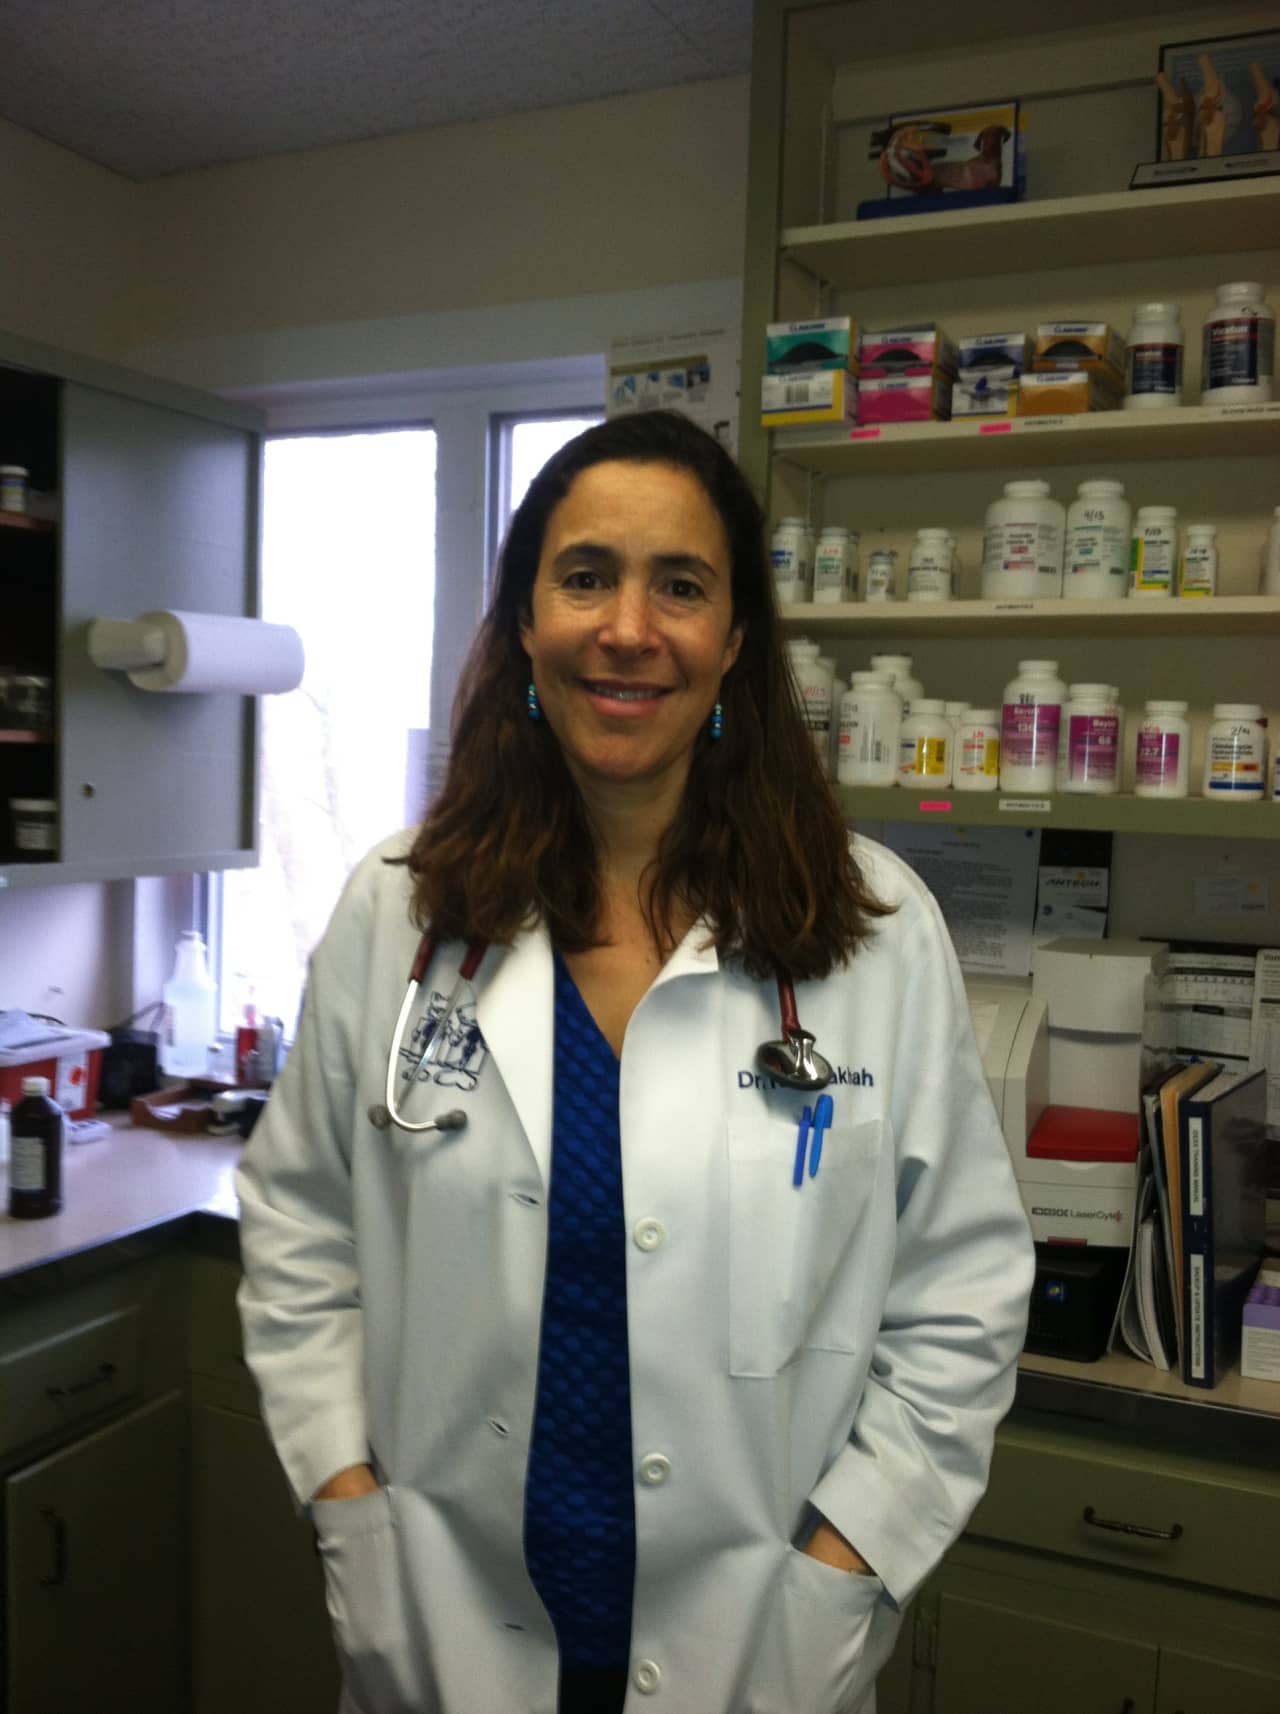 Dr. Kimberly Khodakhah of Harrison is the new addition to the staff at the Miller Clark Animal Hospital in Mamaroneck.